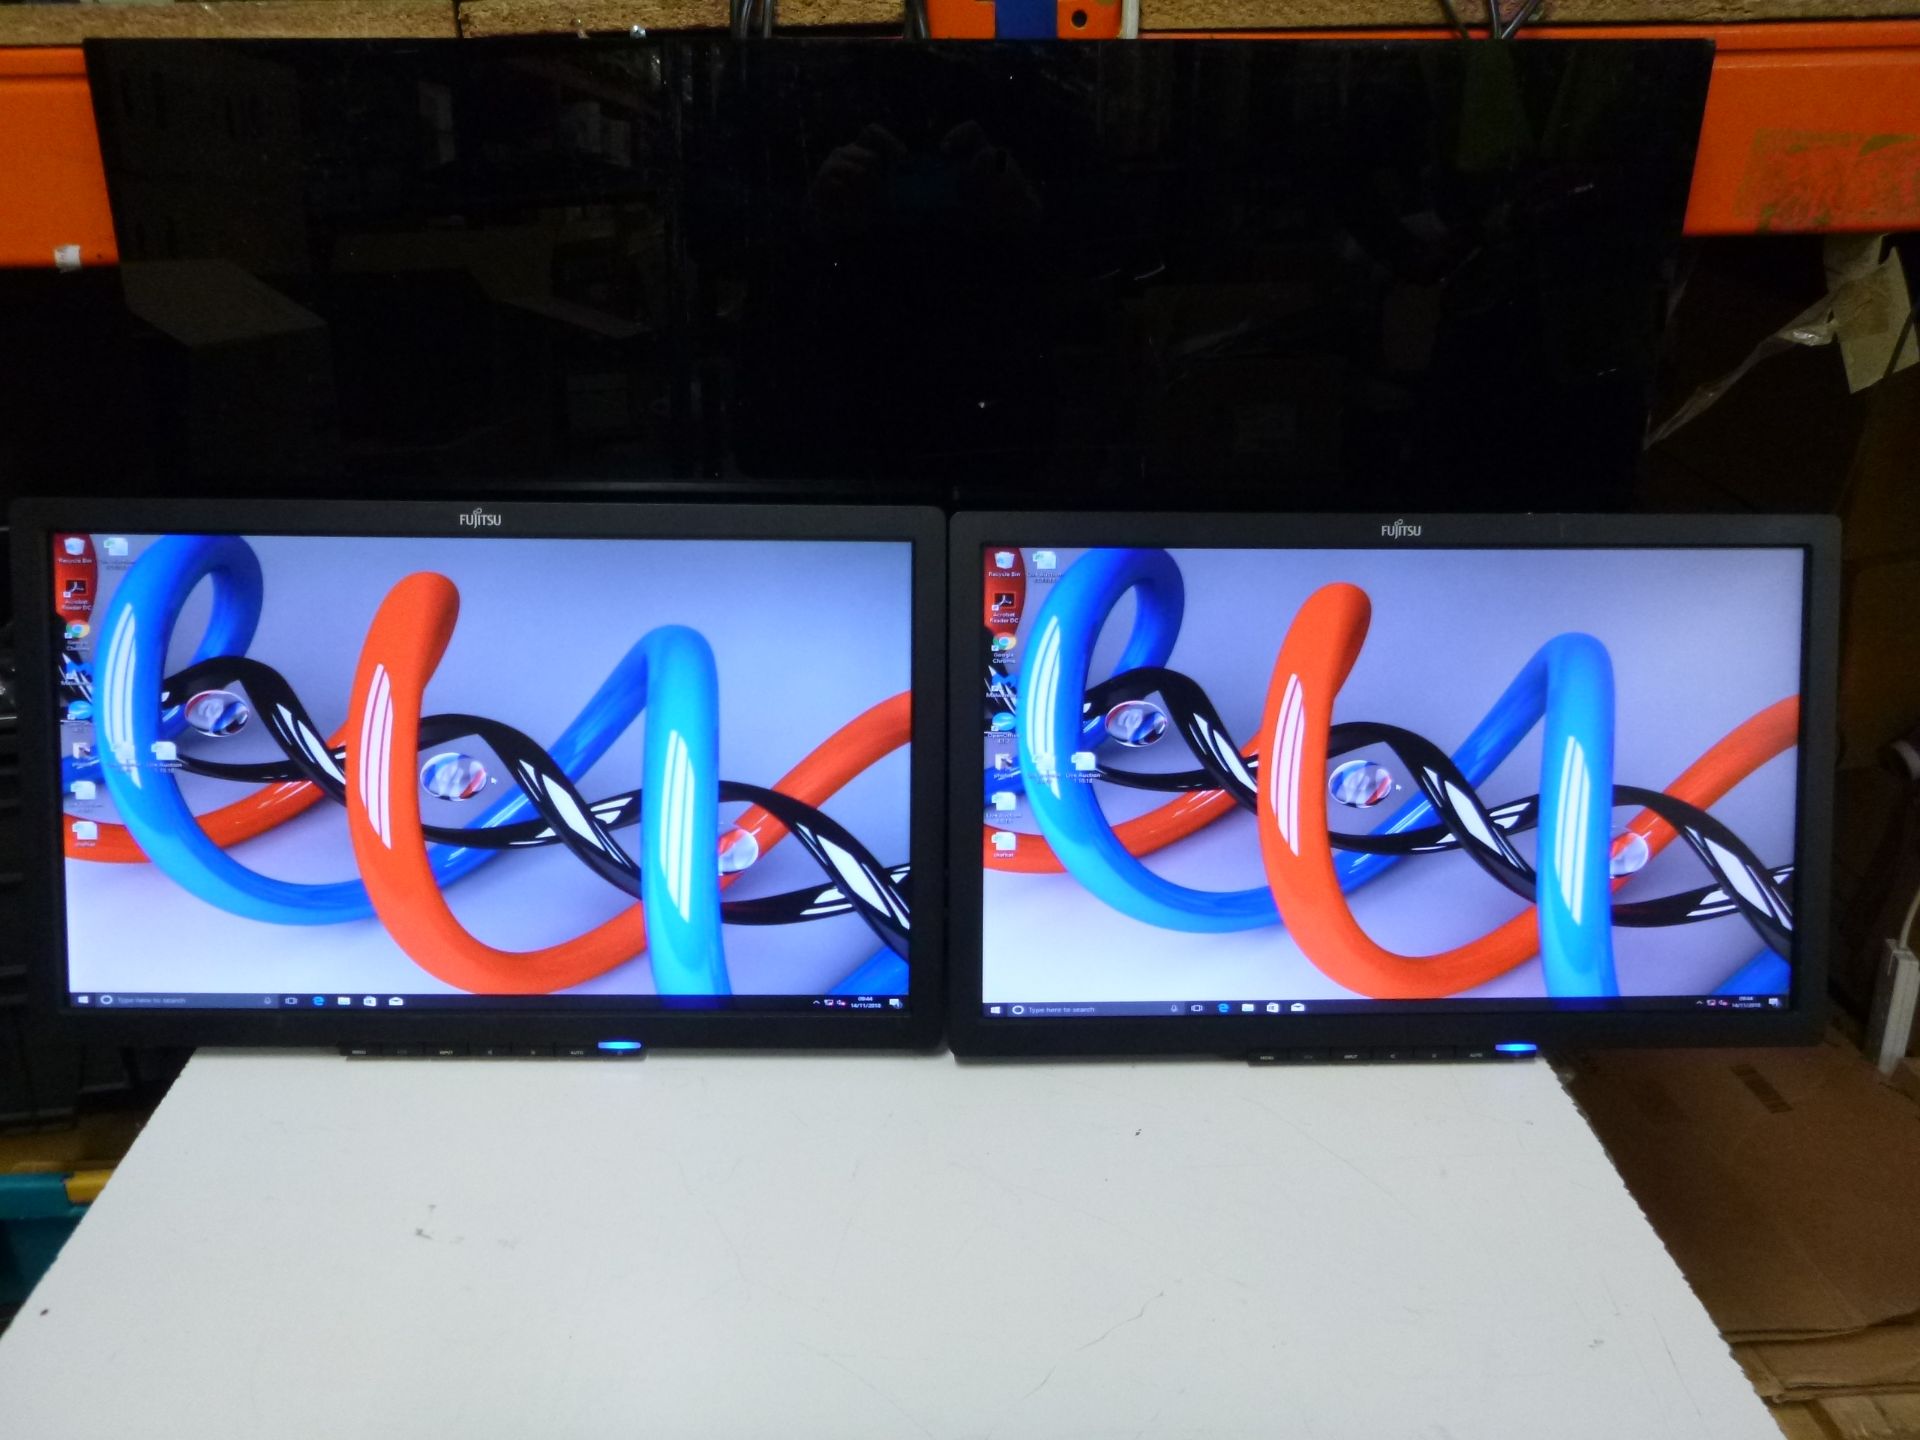 PAIR OF FUJITSU 22" LCD SCREENS . MODEL B22T-7 (21.5" VIEWABLE) WITHOUT STANDS. EACH HAS HDMI,